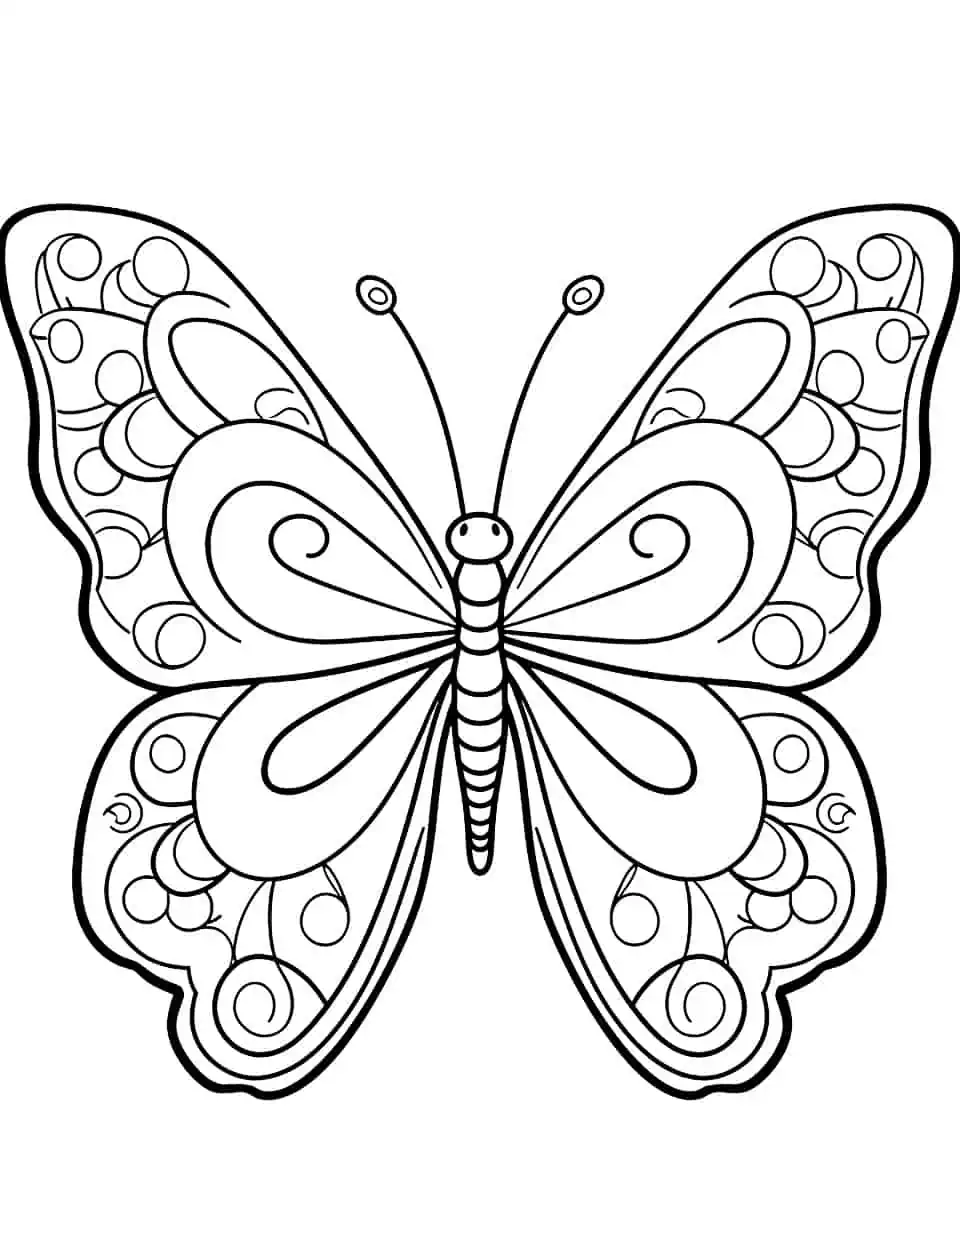 Aesthetic Aura Butterfly Coloring Page - A mesmerizing mandala-style coloring page showcasing a butterfly surrounded by intricate patterns.